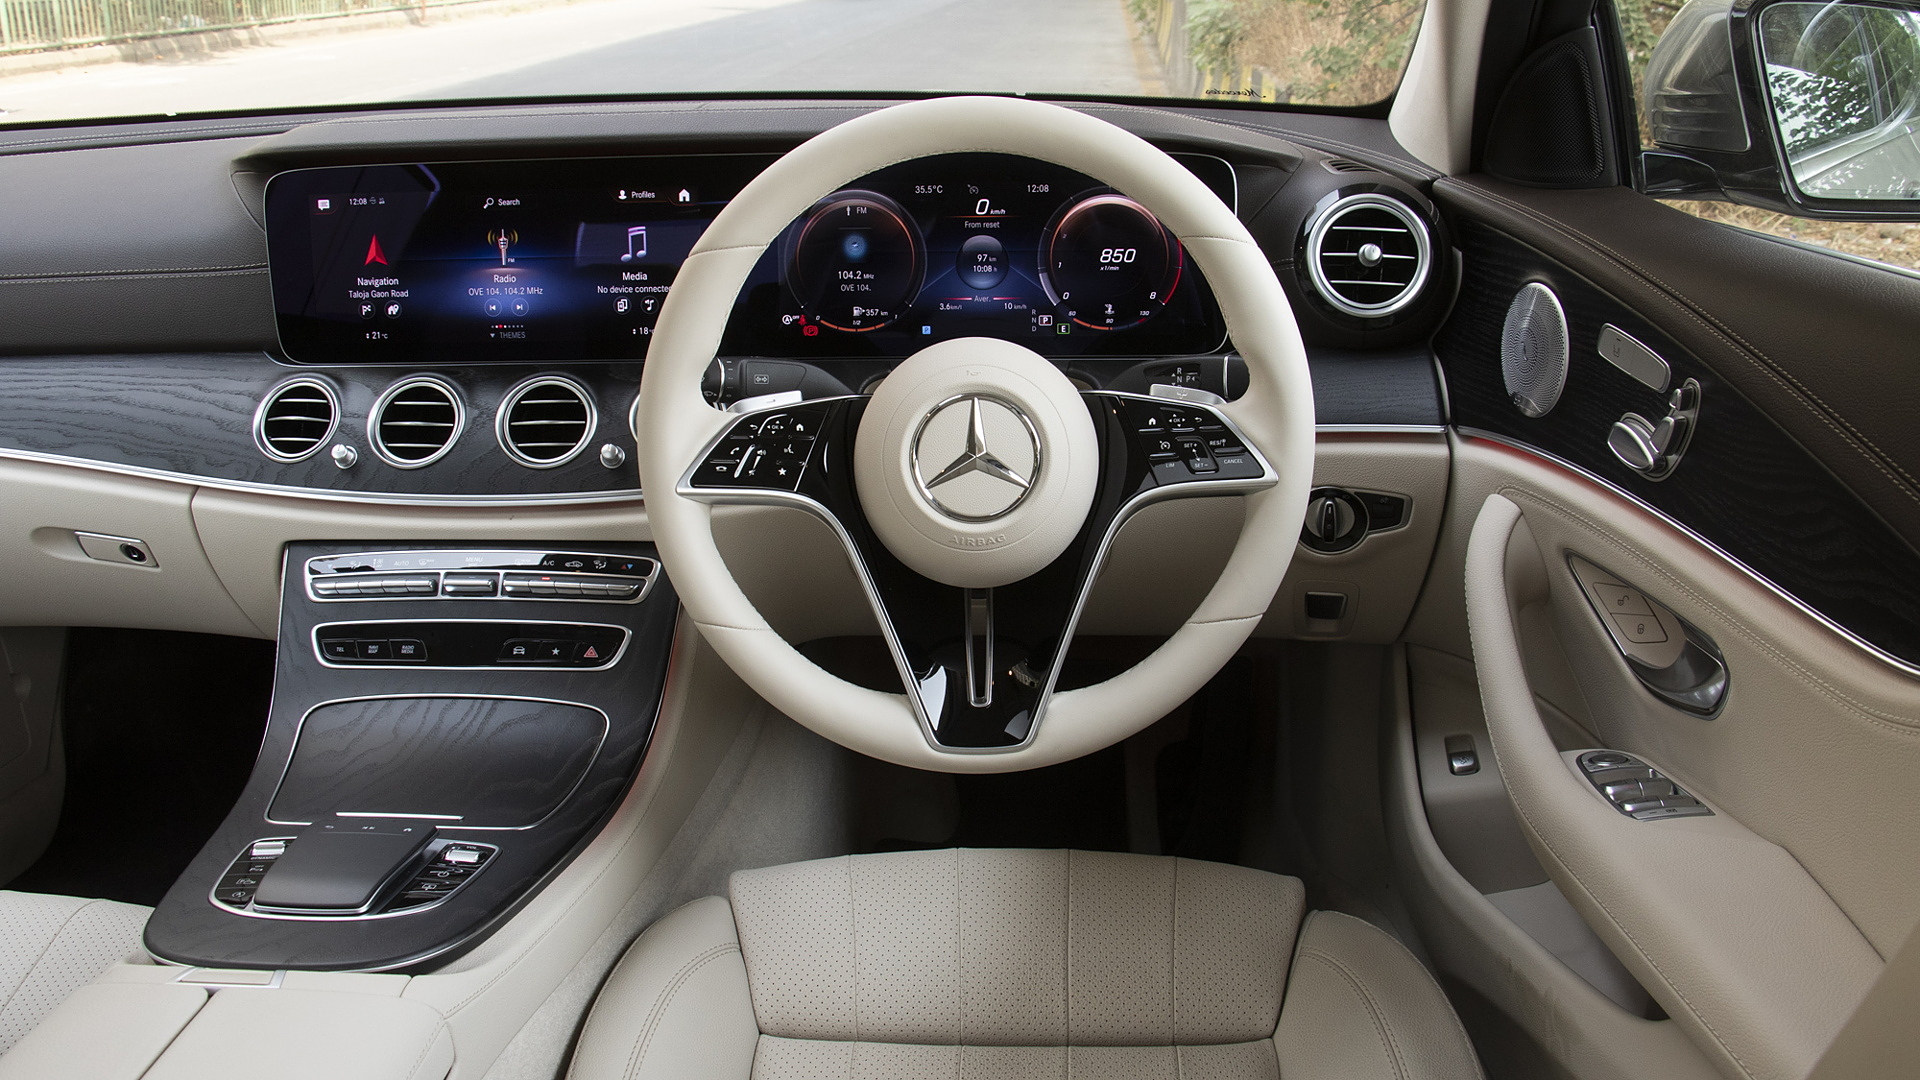 Mercedes Benz E Class Images Interior Exterior Photo Gallery 150 Images Carwale